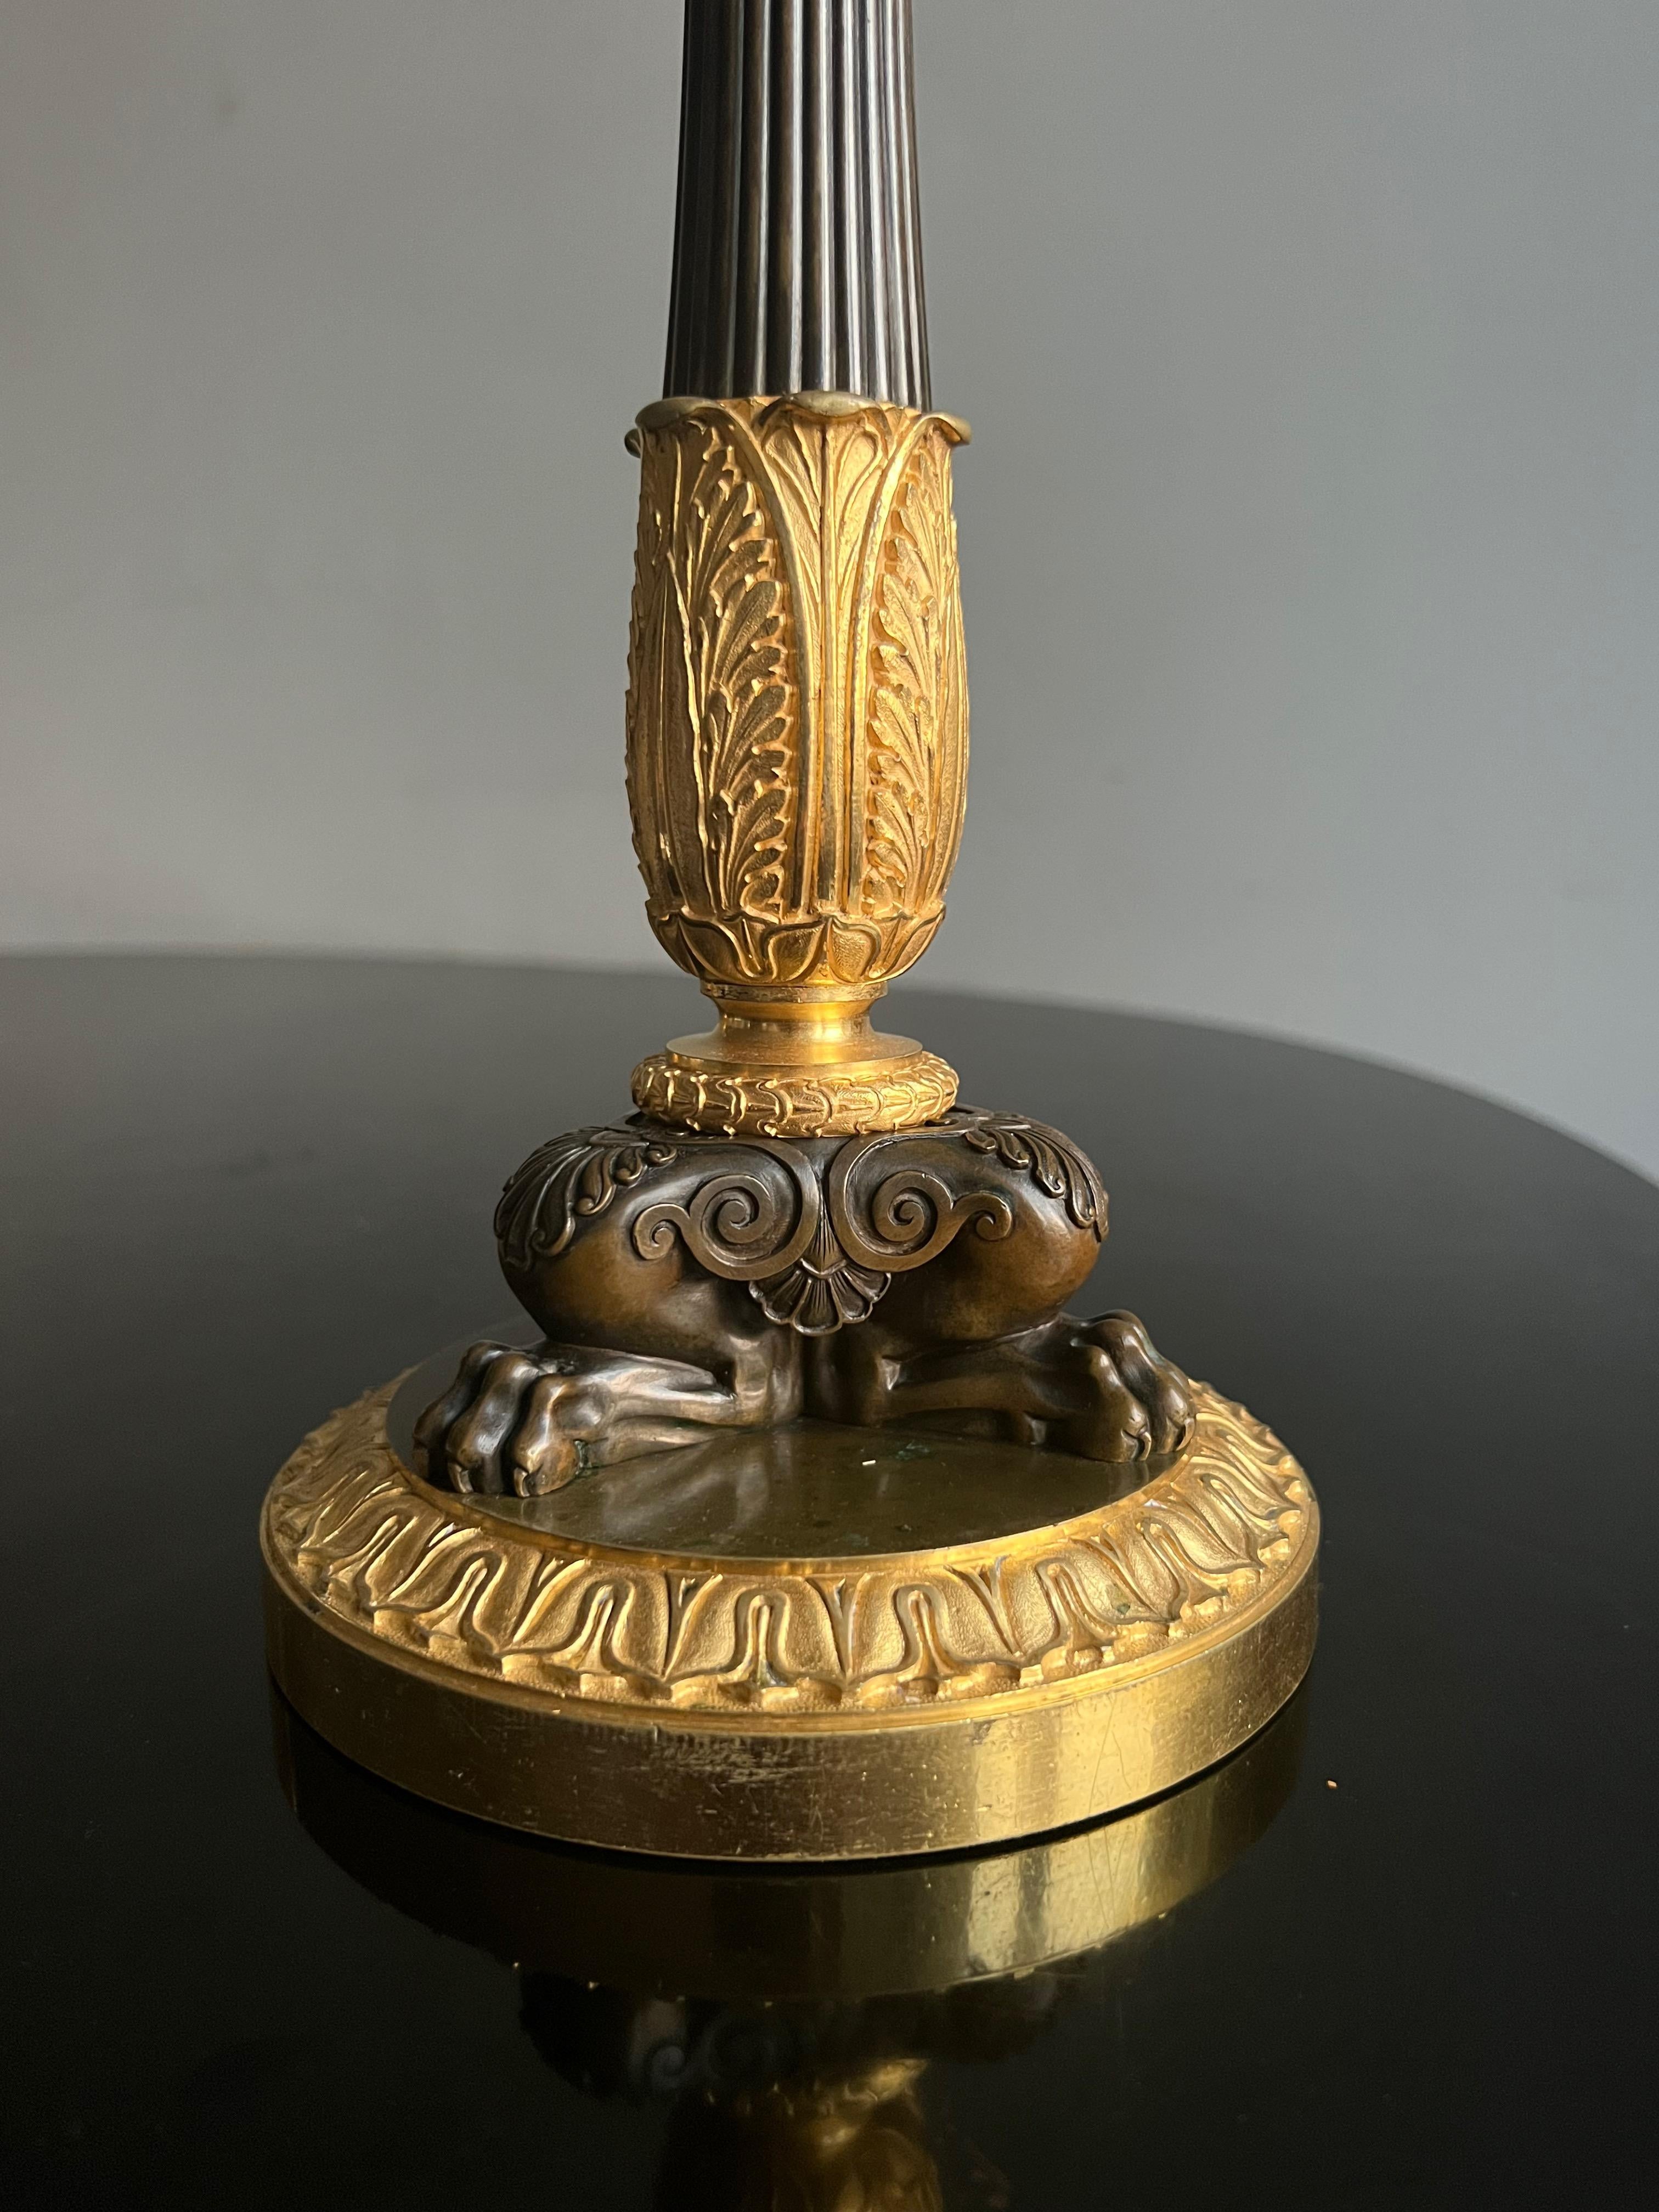 A fine pair of large candlesticks in finley chiselled, gilded and patinated bronze. The base has inventory marks attesting to their belonging to LOUIS-PHILIPPE I, Roi des Français (August 9, 1830 - February 24, 1848), for his residence Le Château de